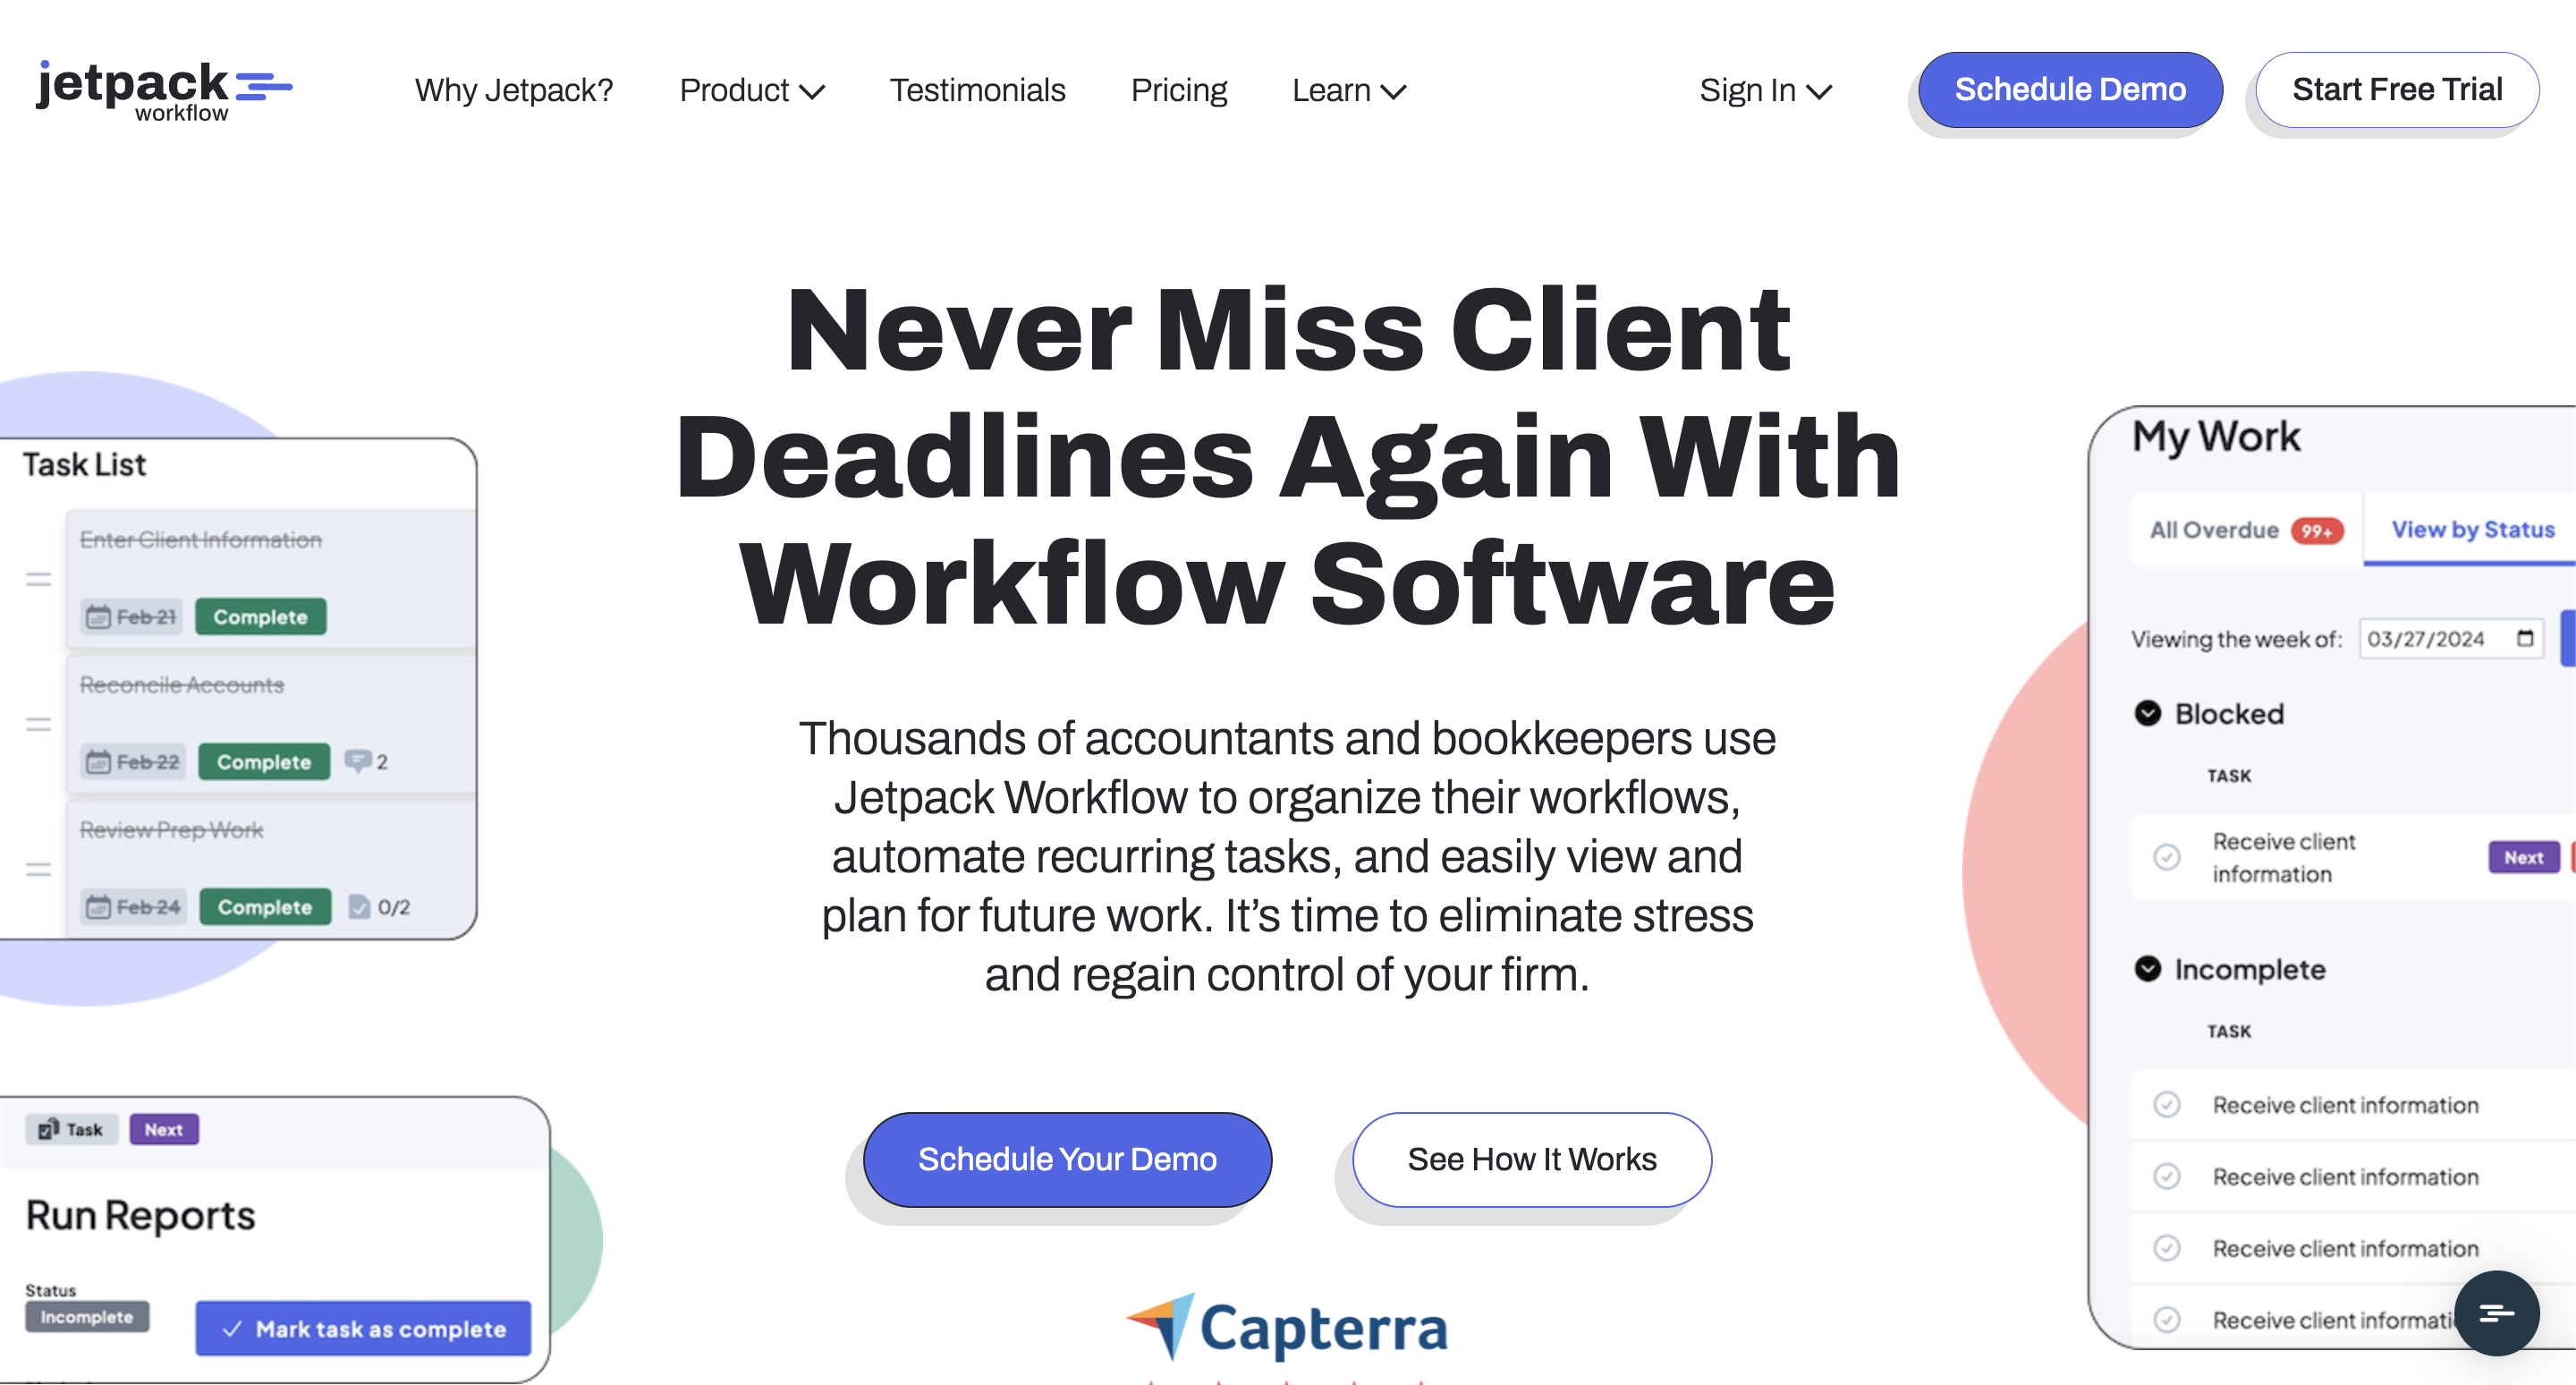 workflow management software for accounting teams - jetpack workflow